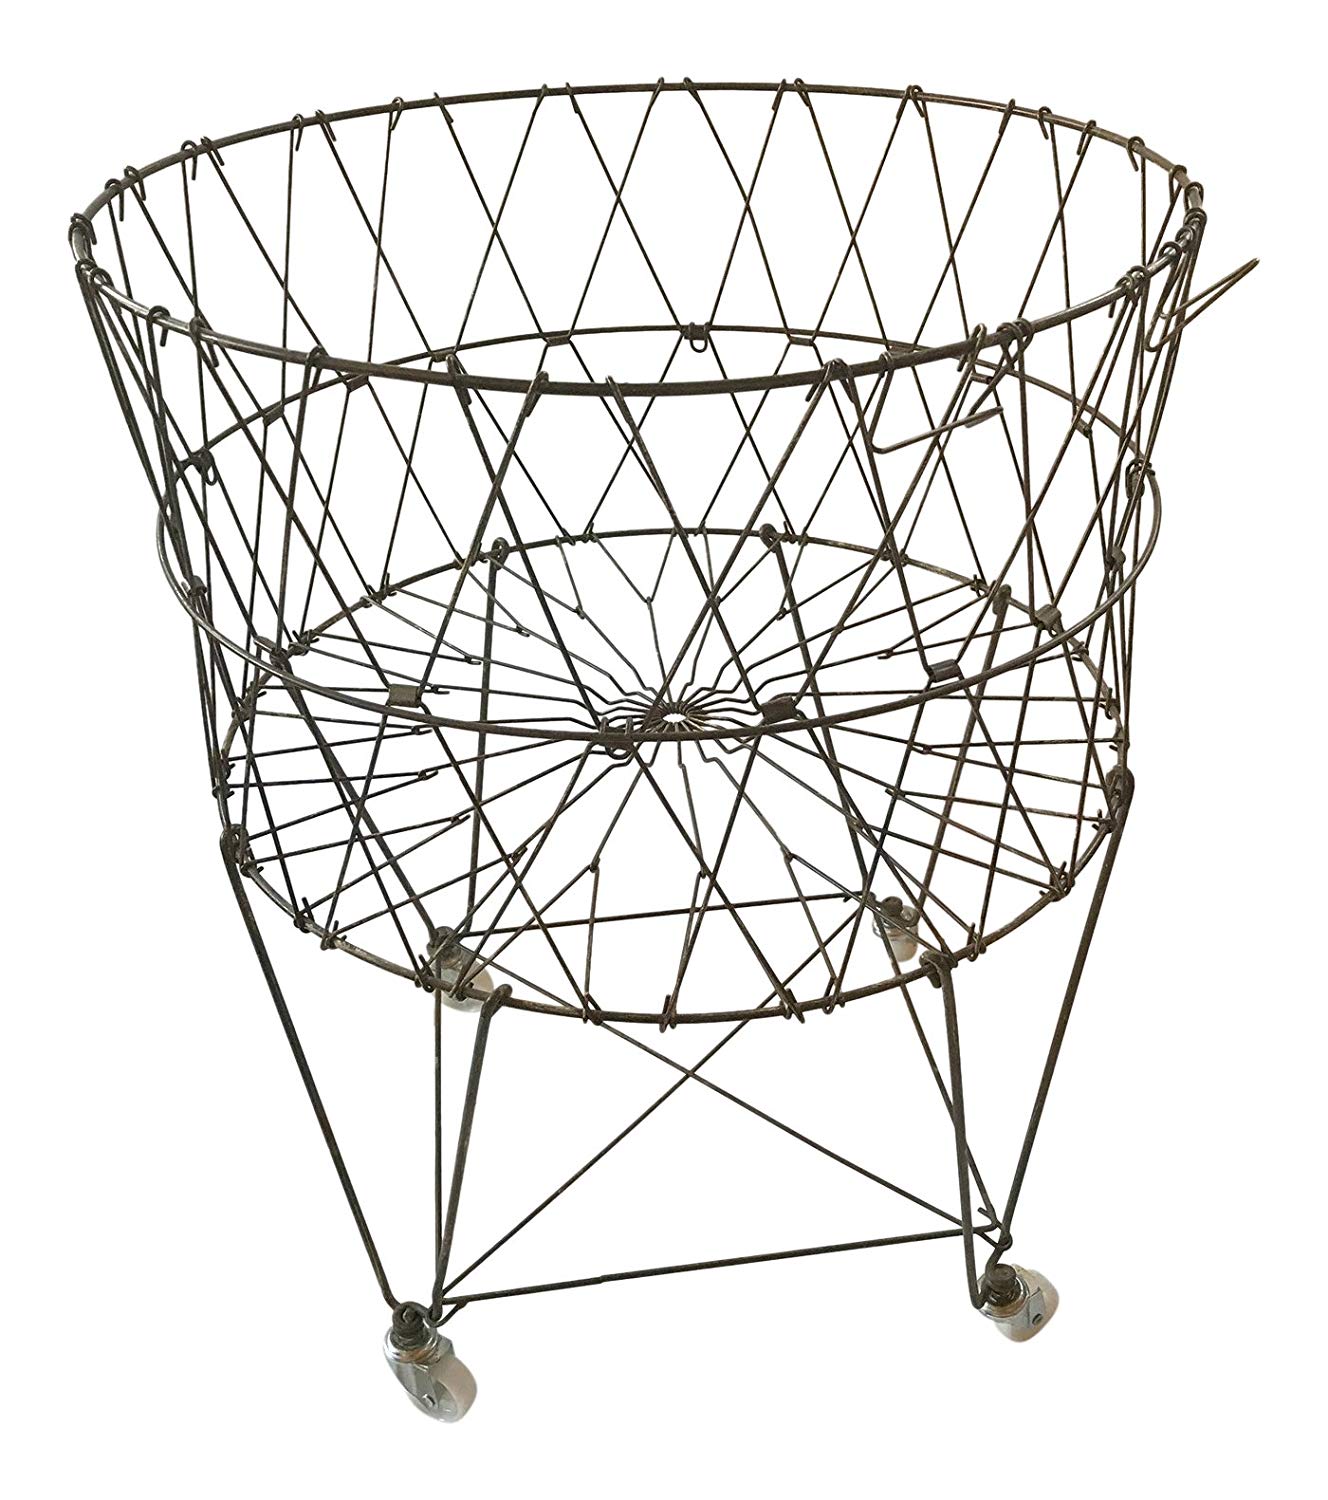 French Laundry Basket - a vintage reproduction metal, collapsible basket for the laundry room, bedroom, toy room, or anywhere you need to corral linens, toys, or storage.